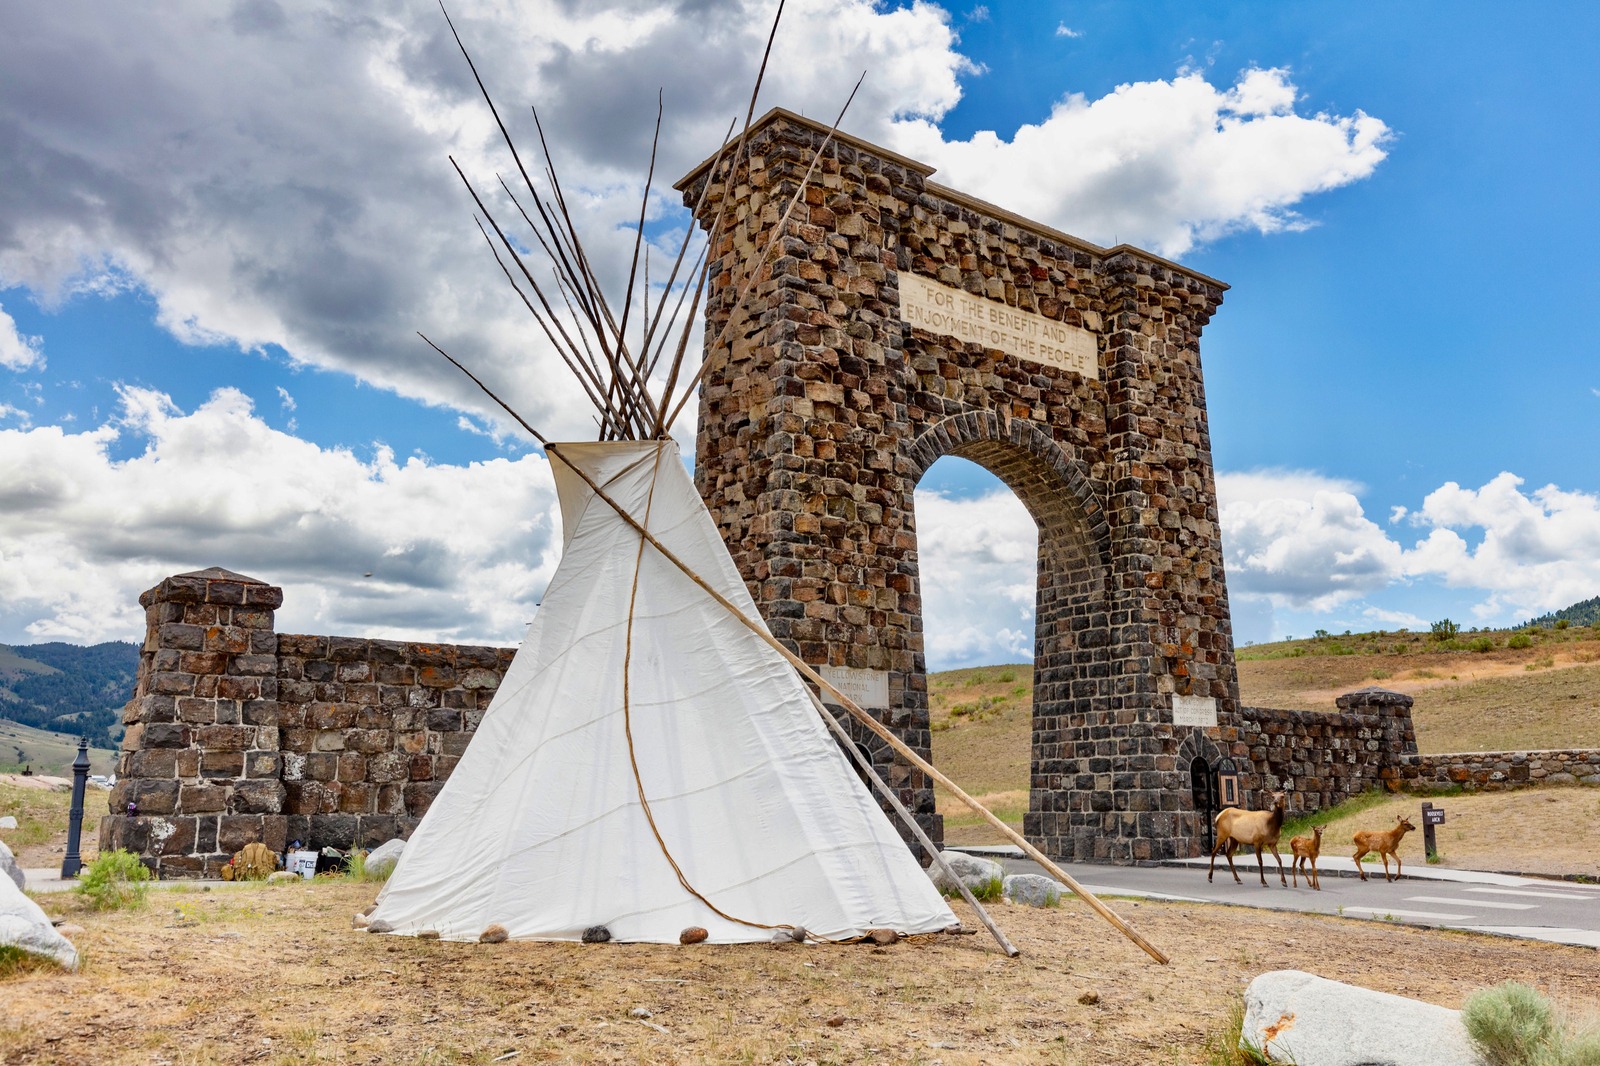 Yellowstone as homeland. As represented by the symbolic installation of a tipi this year, differing values converge upon the doorstep of Yellowstone. As the first national park in the world moves toward its 150th anniversary in 2022, indigenous tribes, artists and the National Park Service are working together to highlight the ancient—and still ongoing—cultural connections that exist with lands in and around Yellowstone. Photo courtesy Jacob W. Frank/NPS